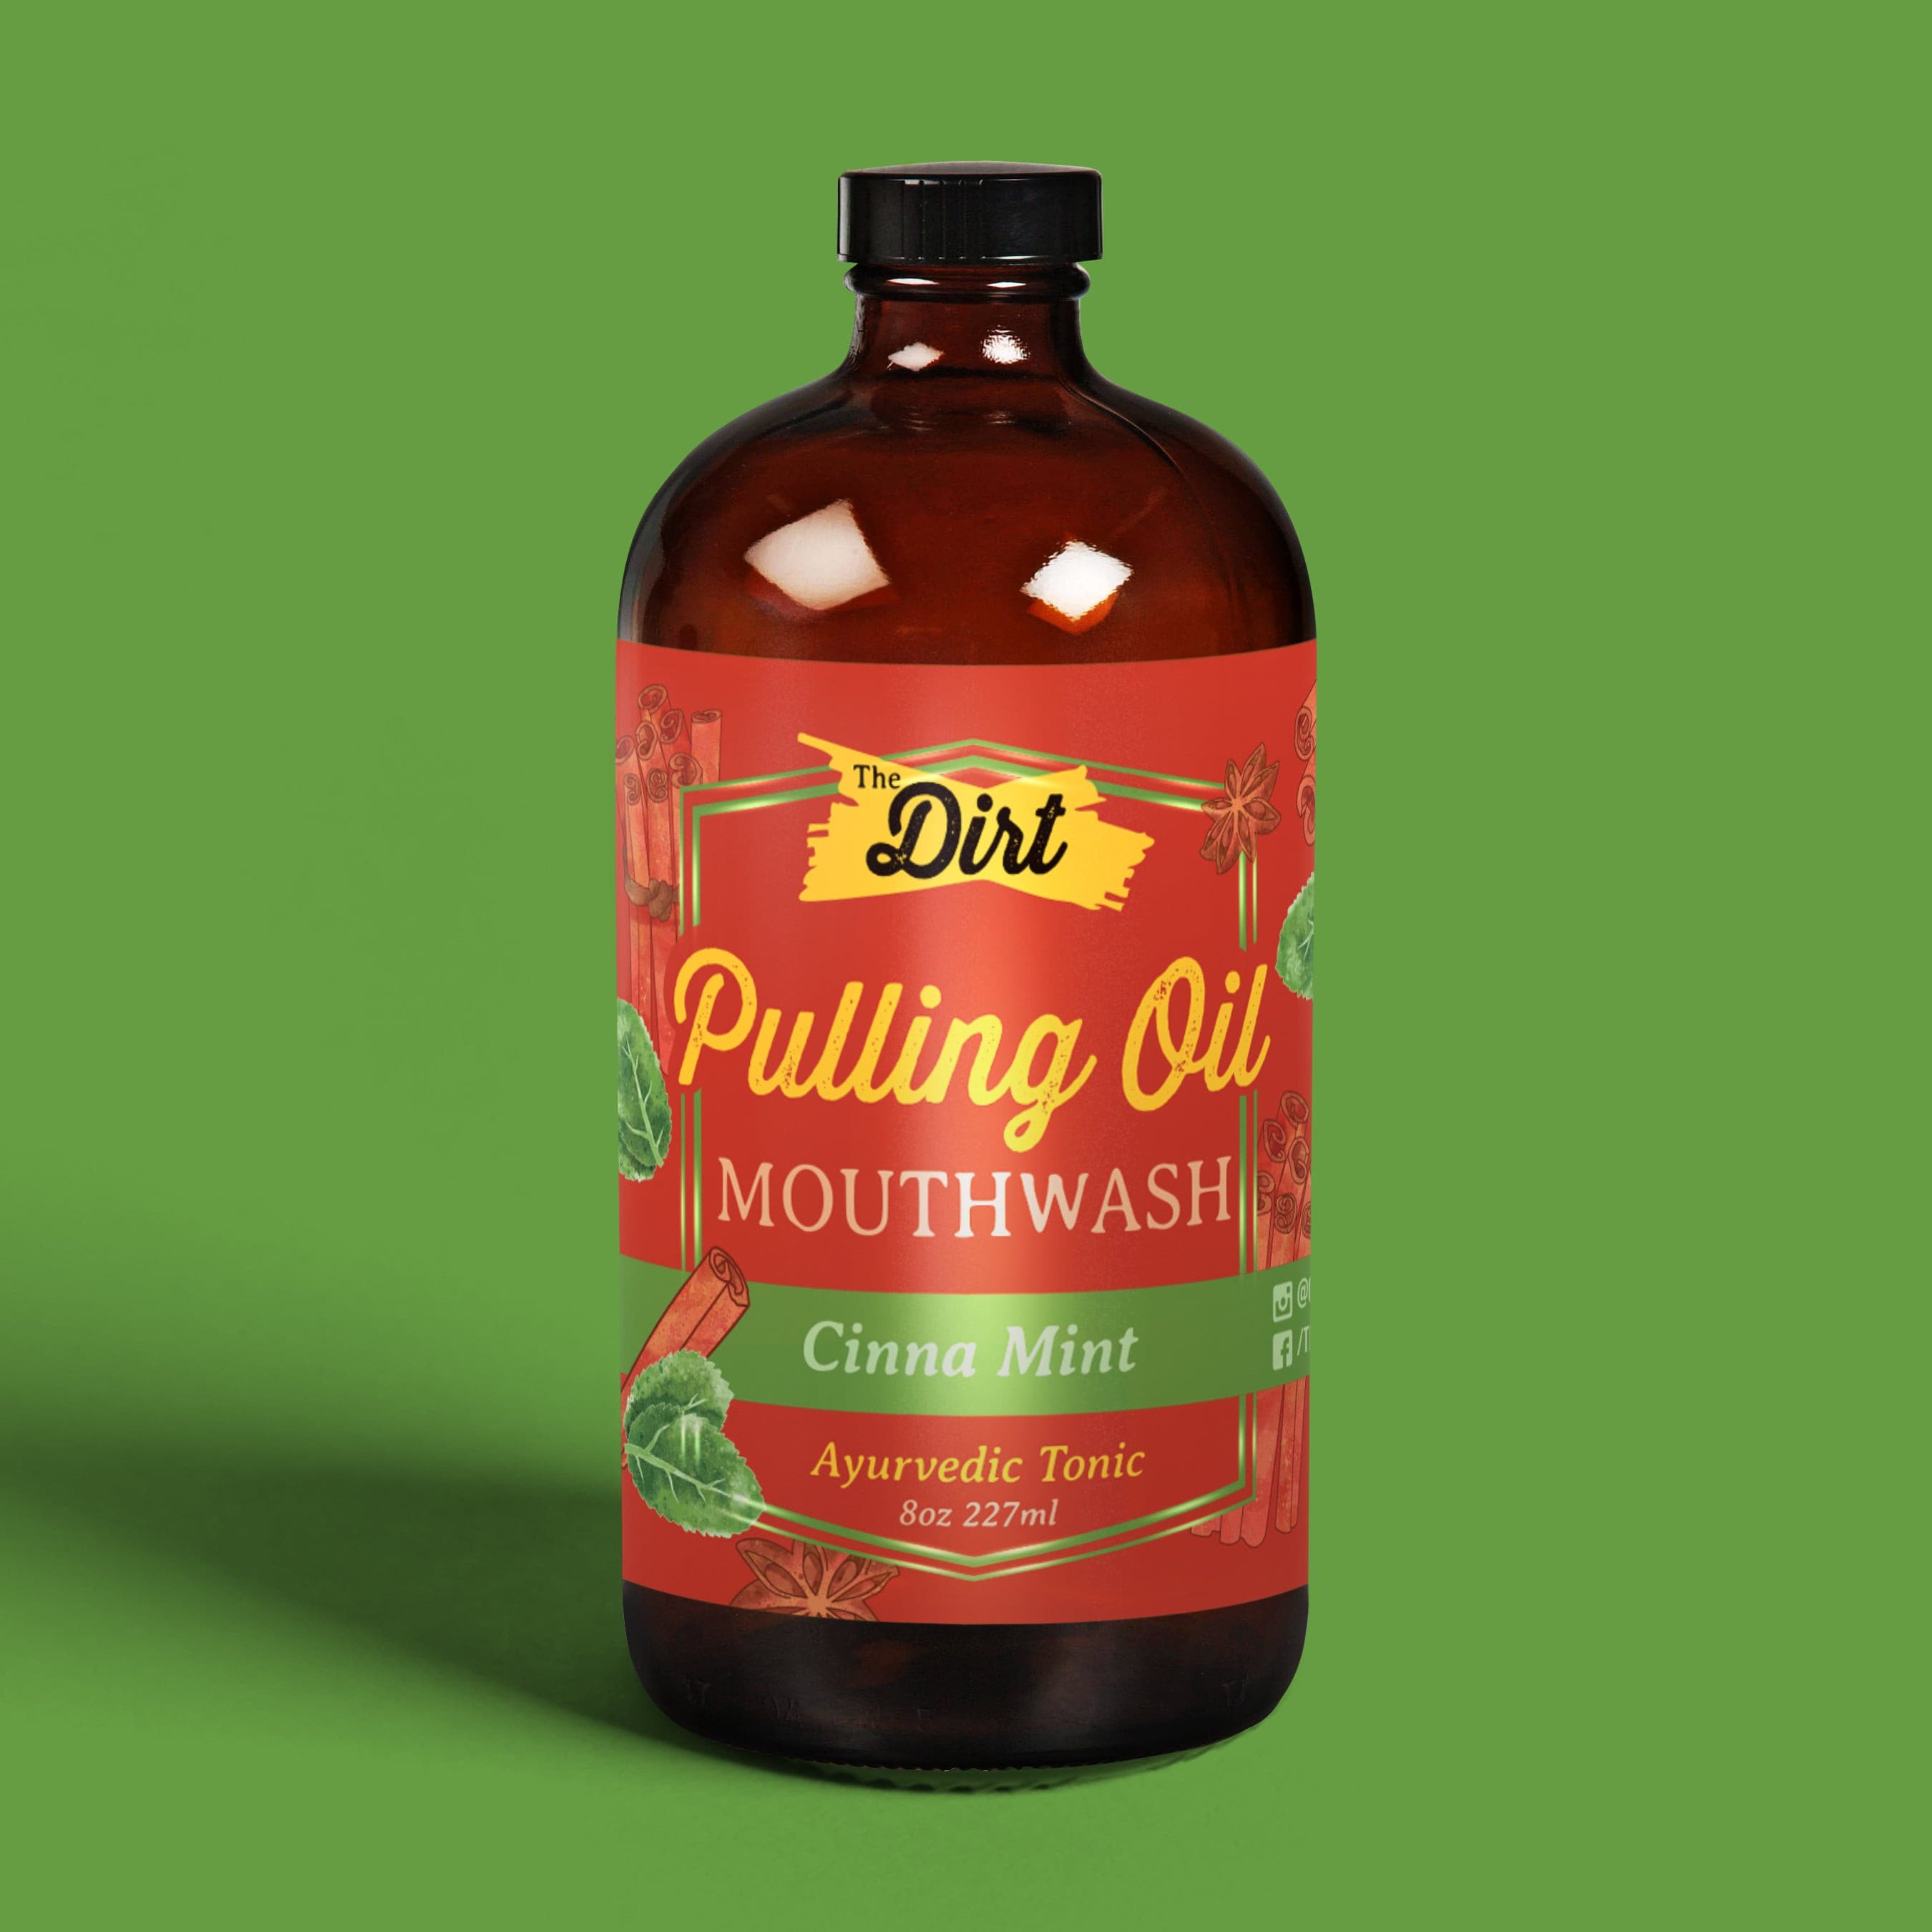 Oil Pulling Mouthwash - The Dirt - Super Natural Personal Care 8oz / Cinna-mint Oral Care